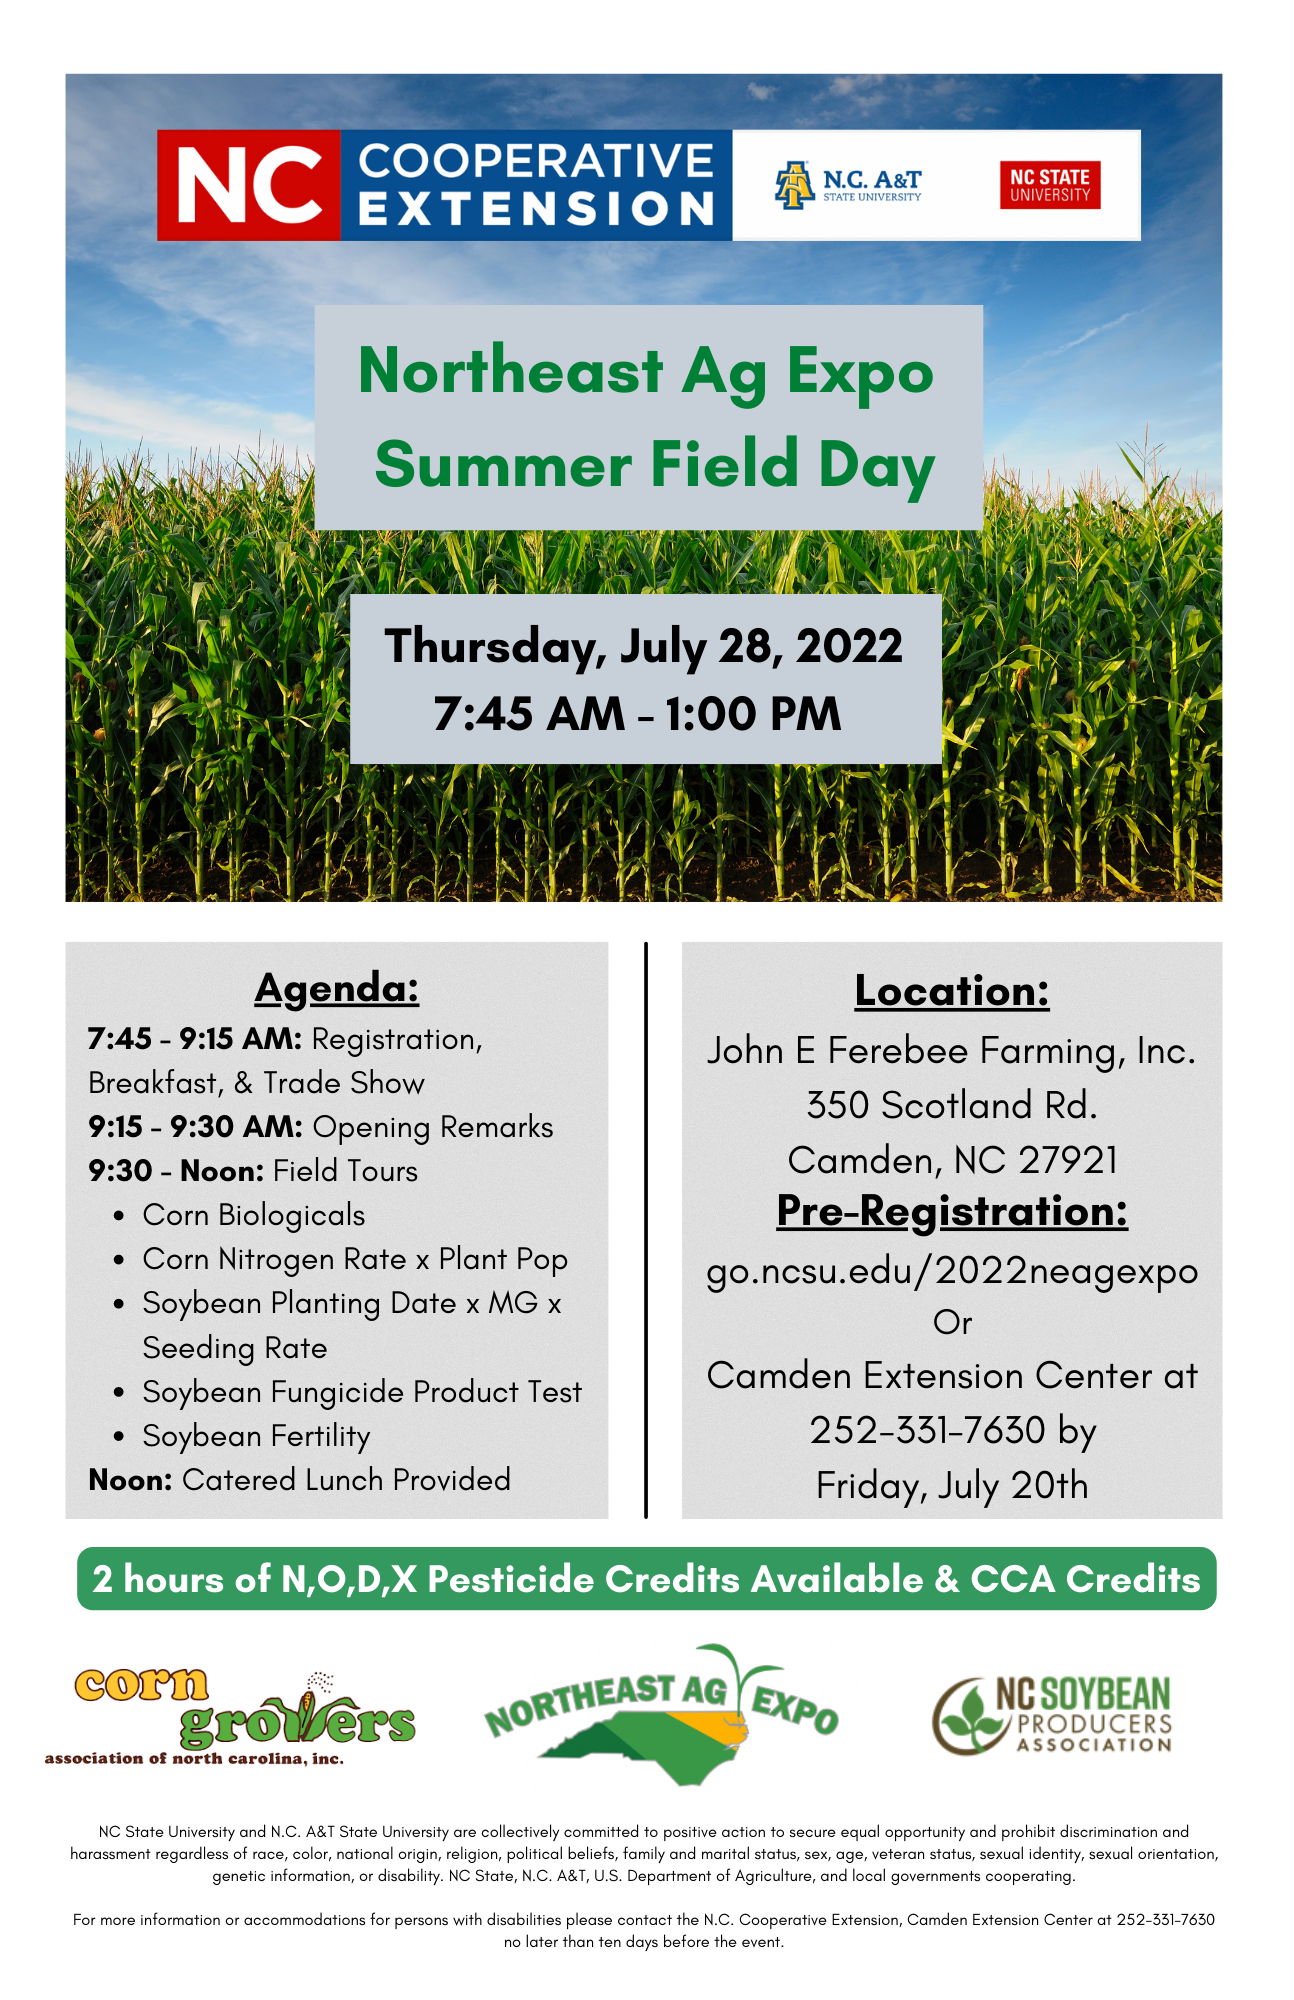 Northeast Ag Expo Summer Field Day, Thursday, July 28, 2022, 7:45 a.m. – 1:00 p.m.